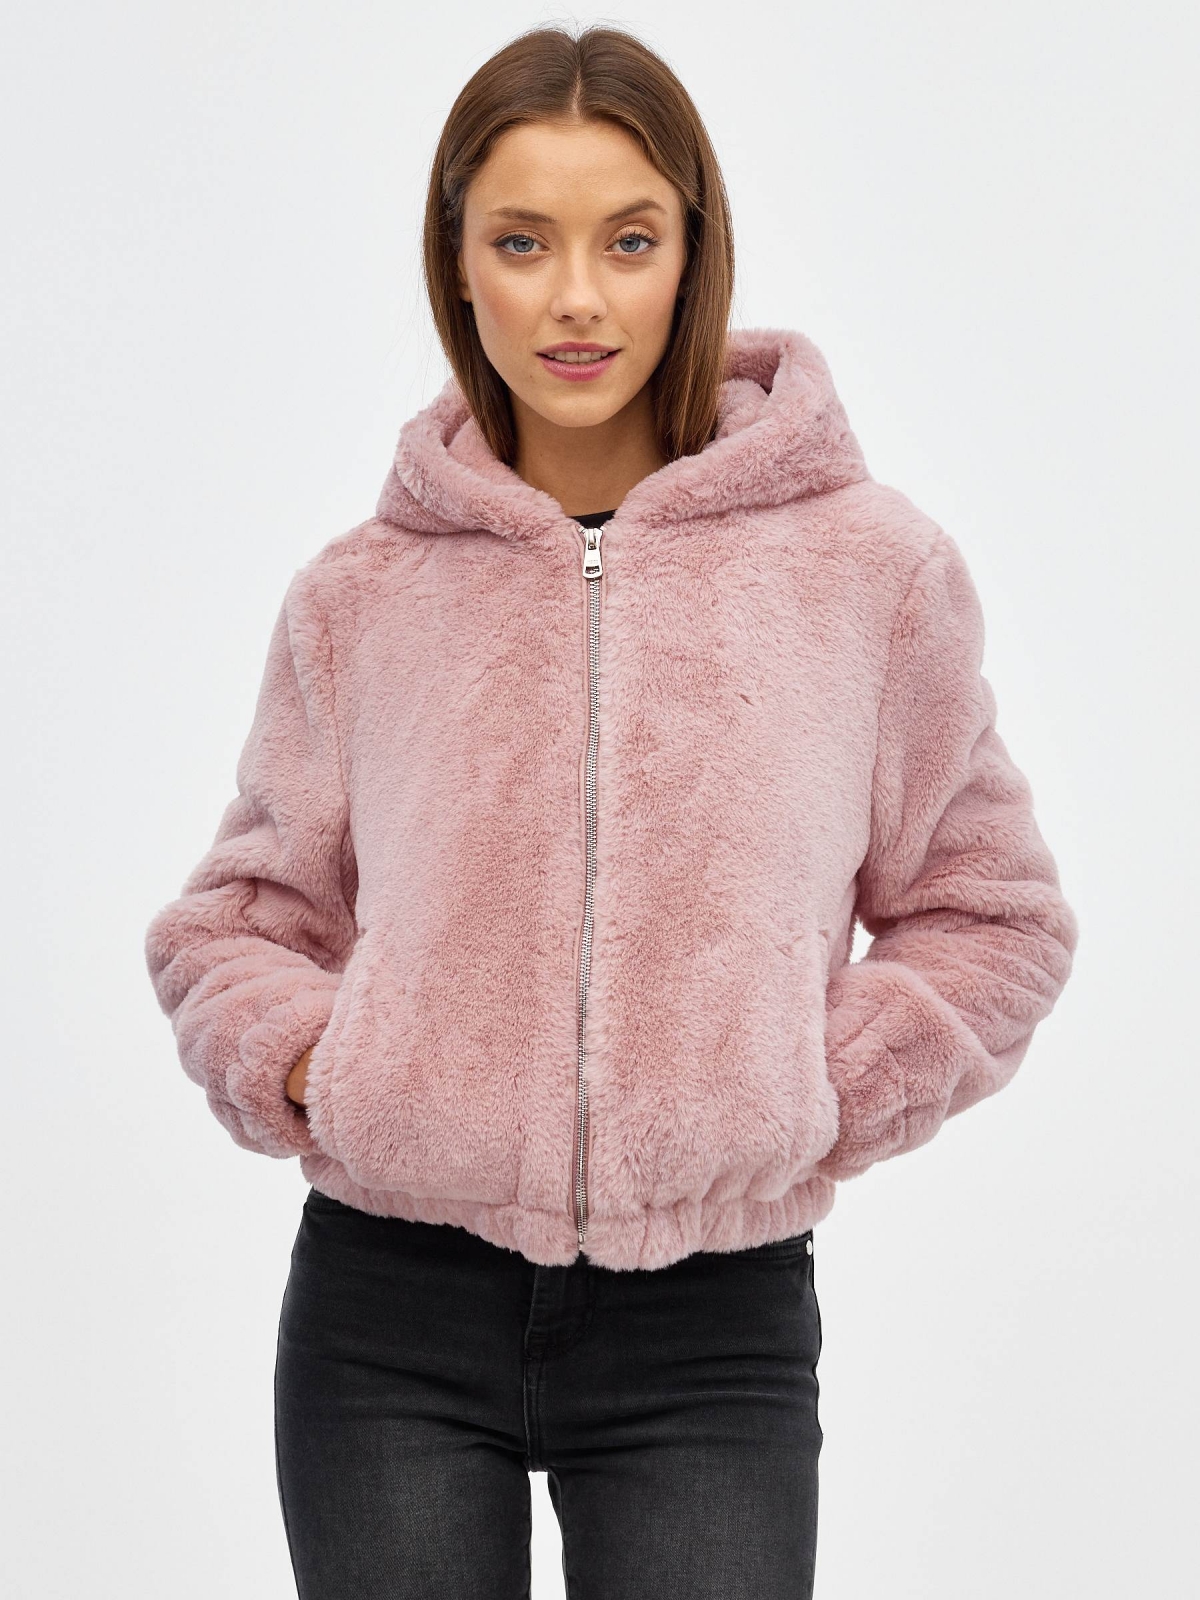 Pink fur effect jacket pink middle front view